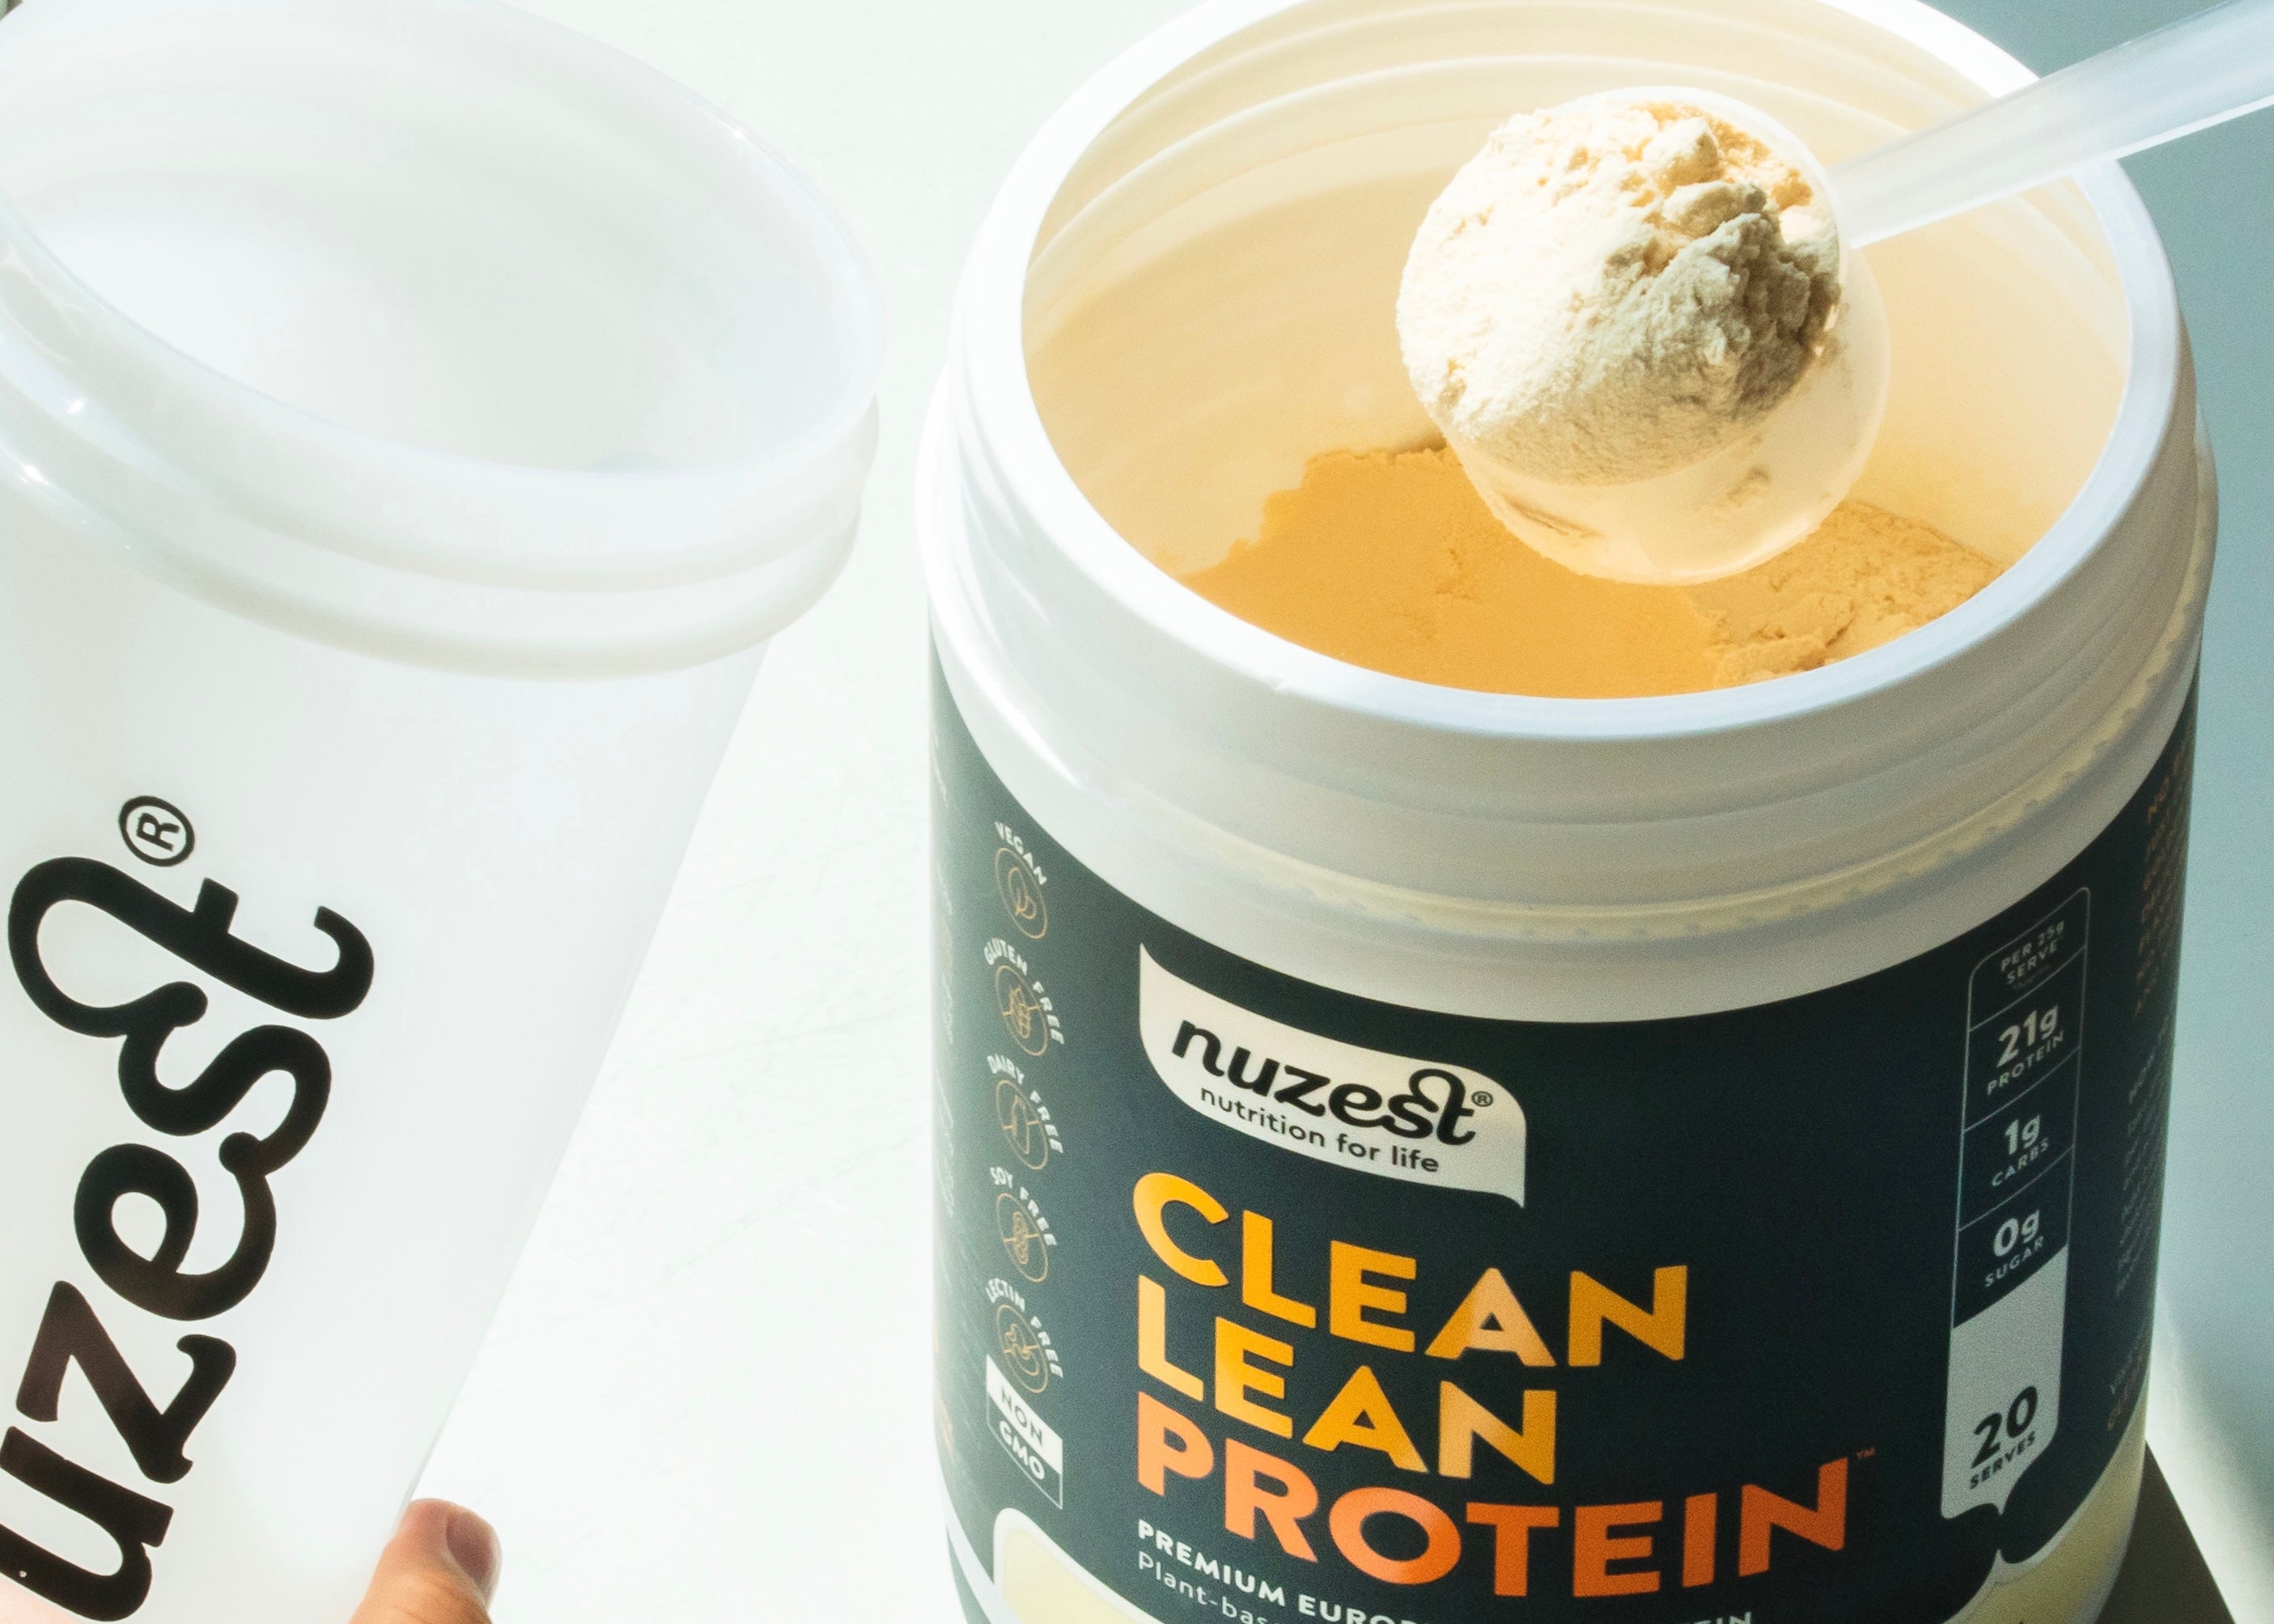 How and when do I use a protein supplement - Clean Lean Protein